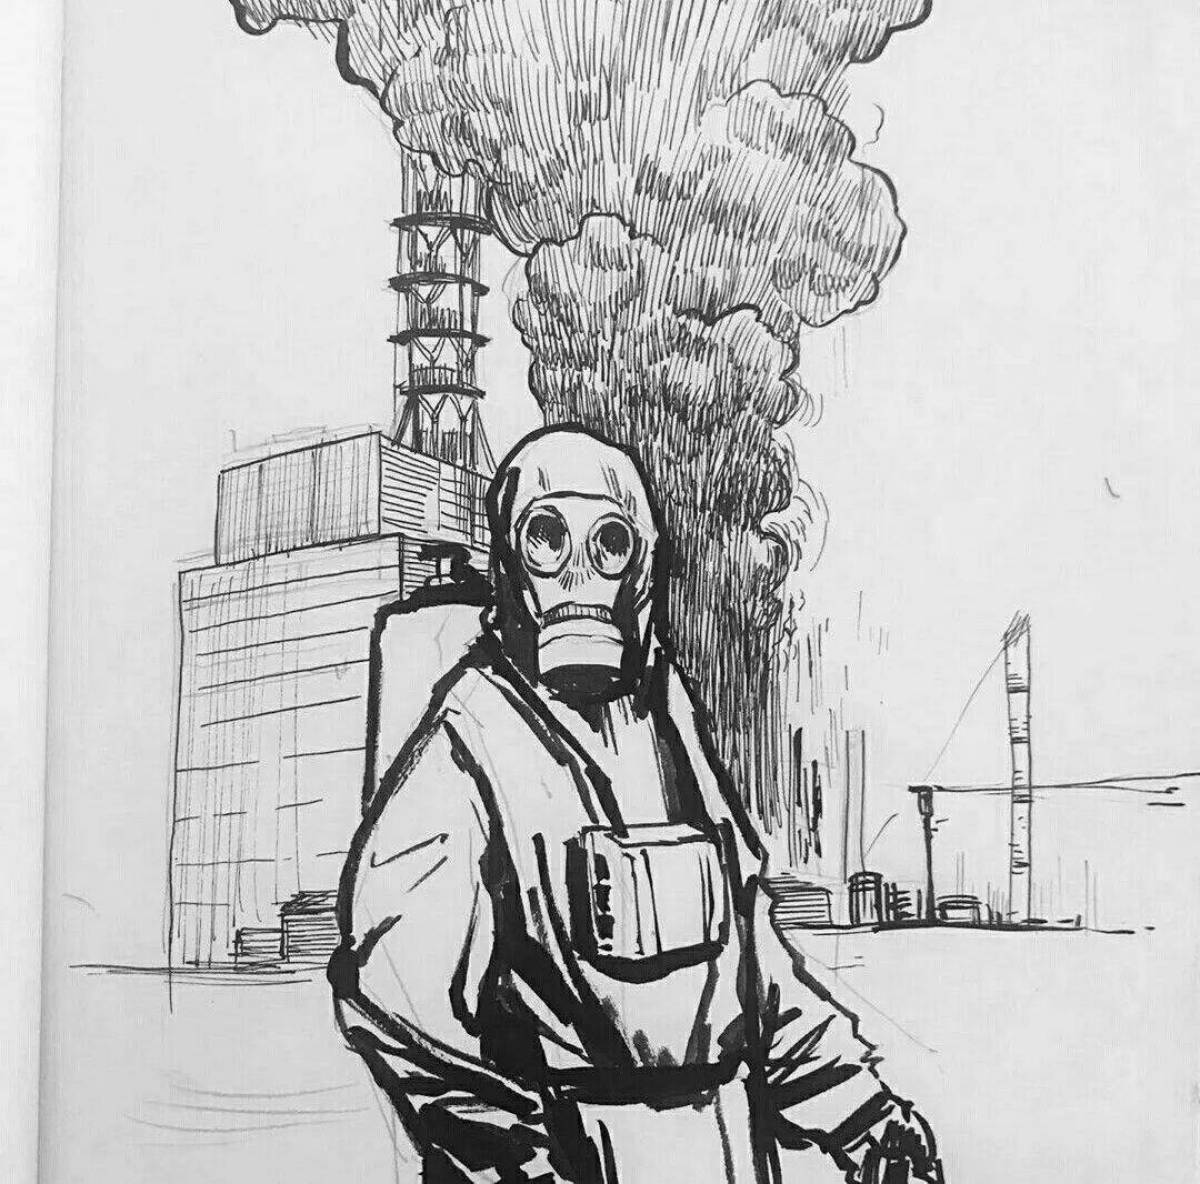 Coloring book bright Chernobyl station